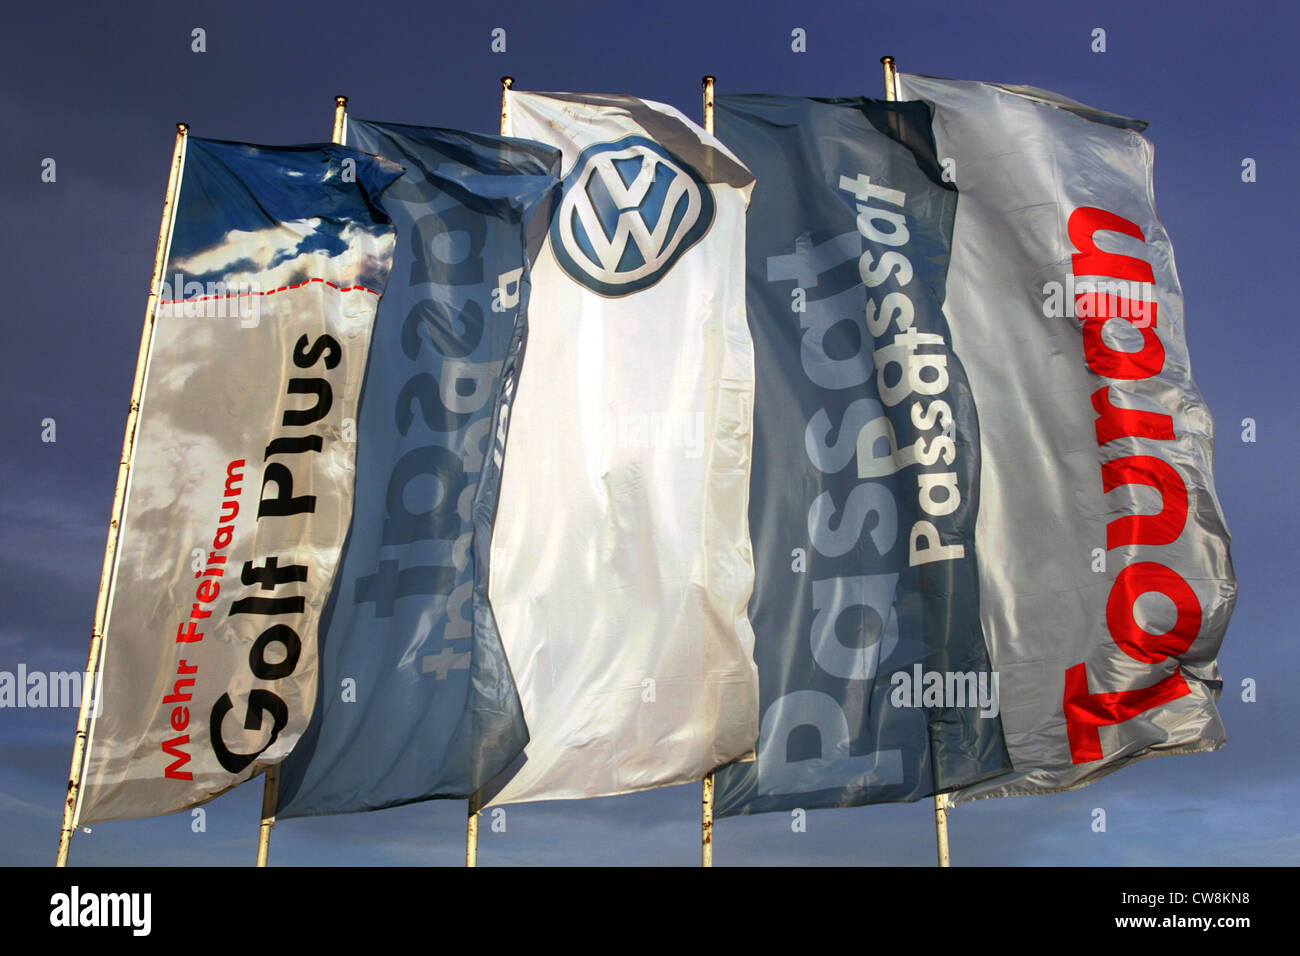 Dresden, waving flags of the car manufacturer VW Stock Photo